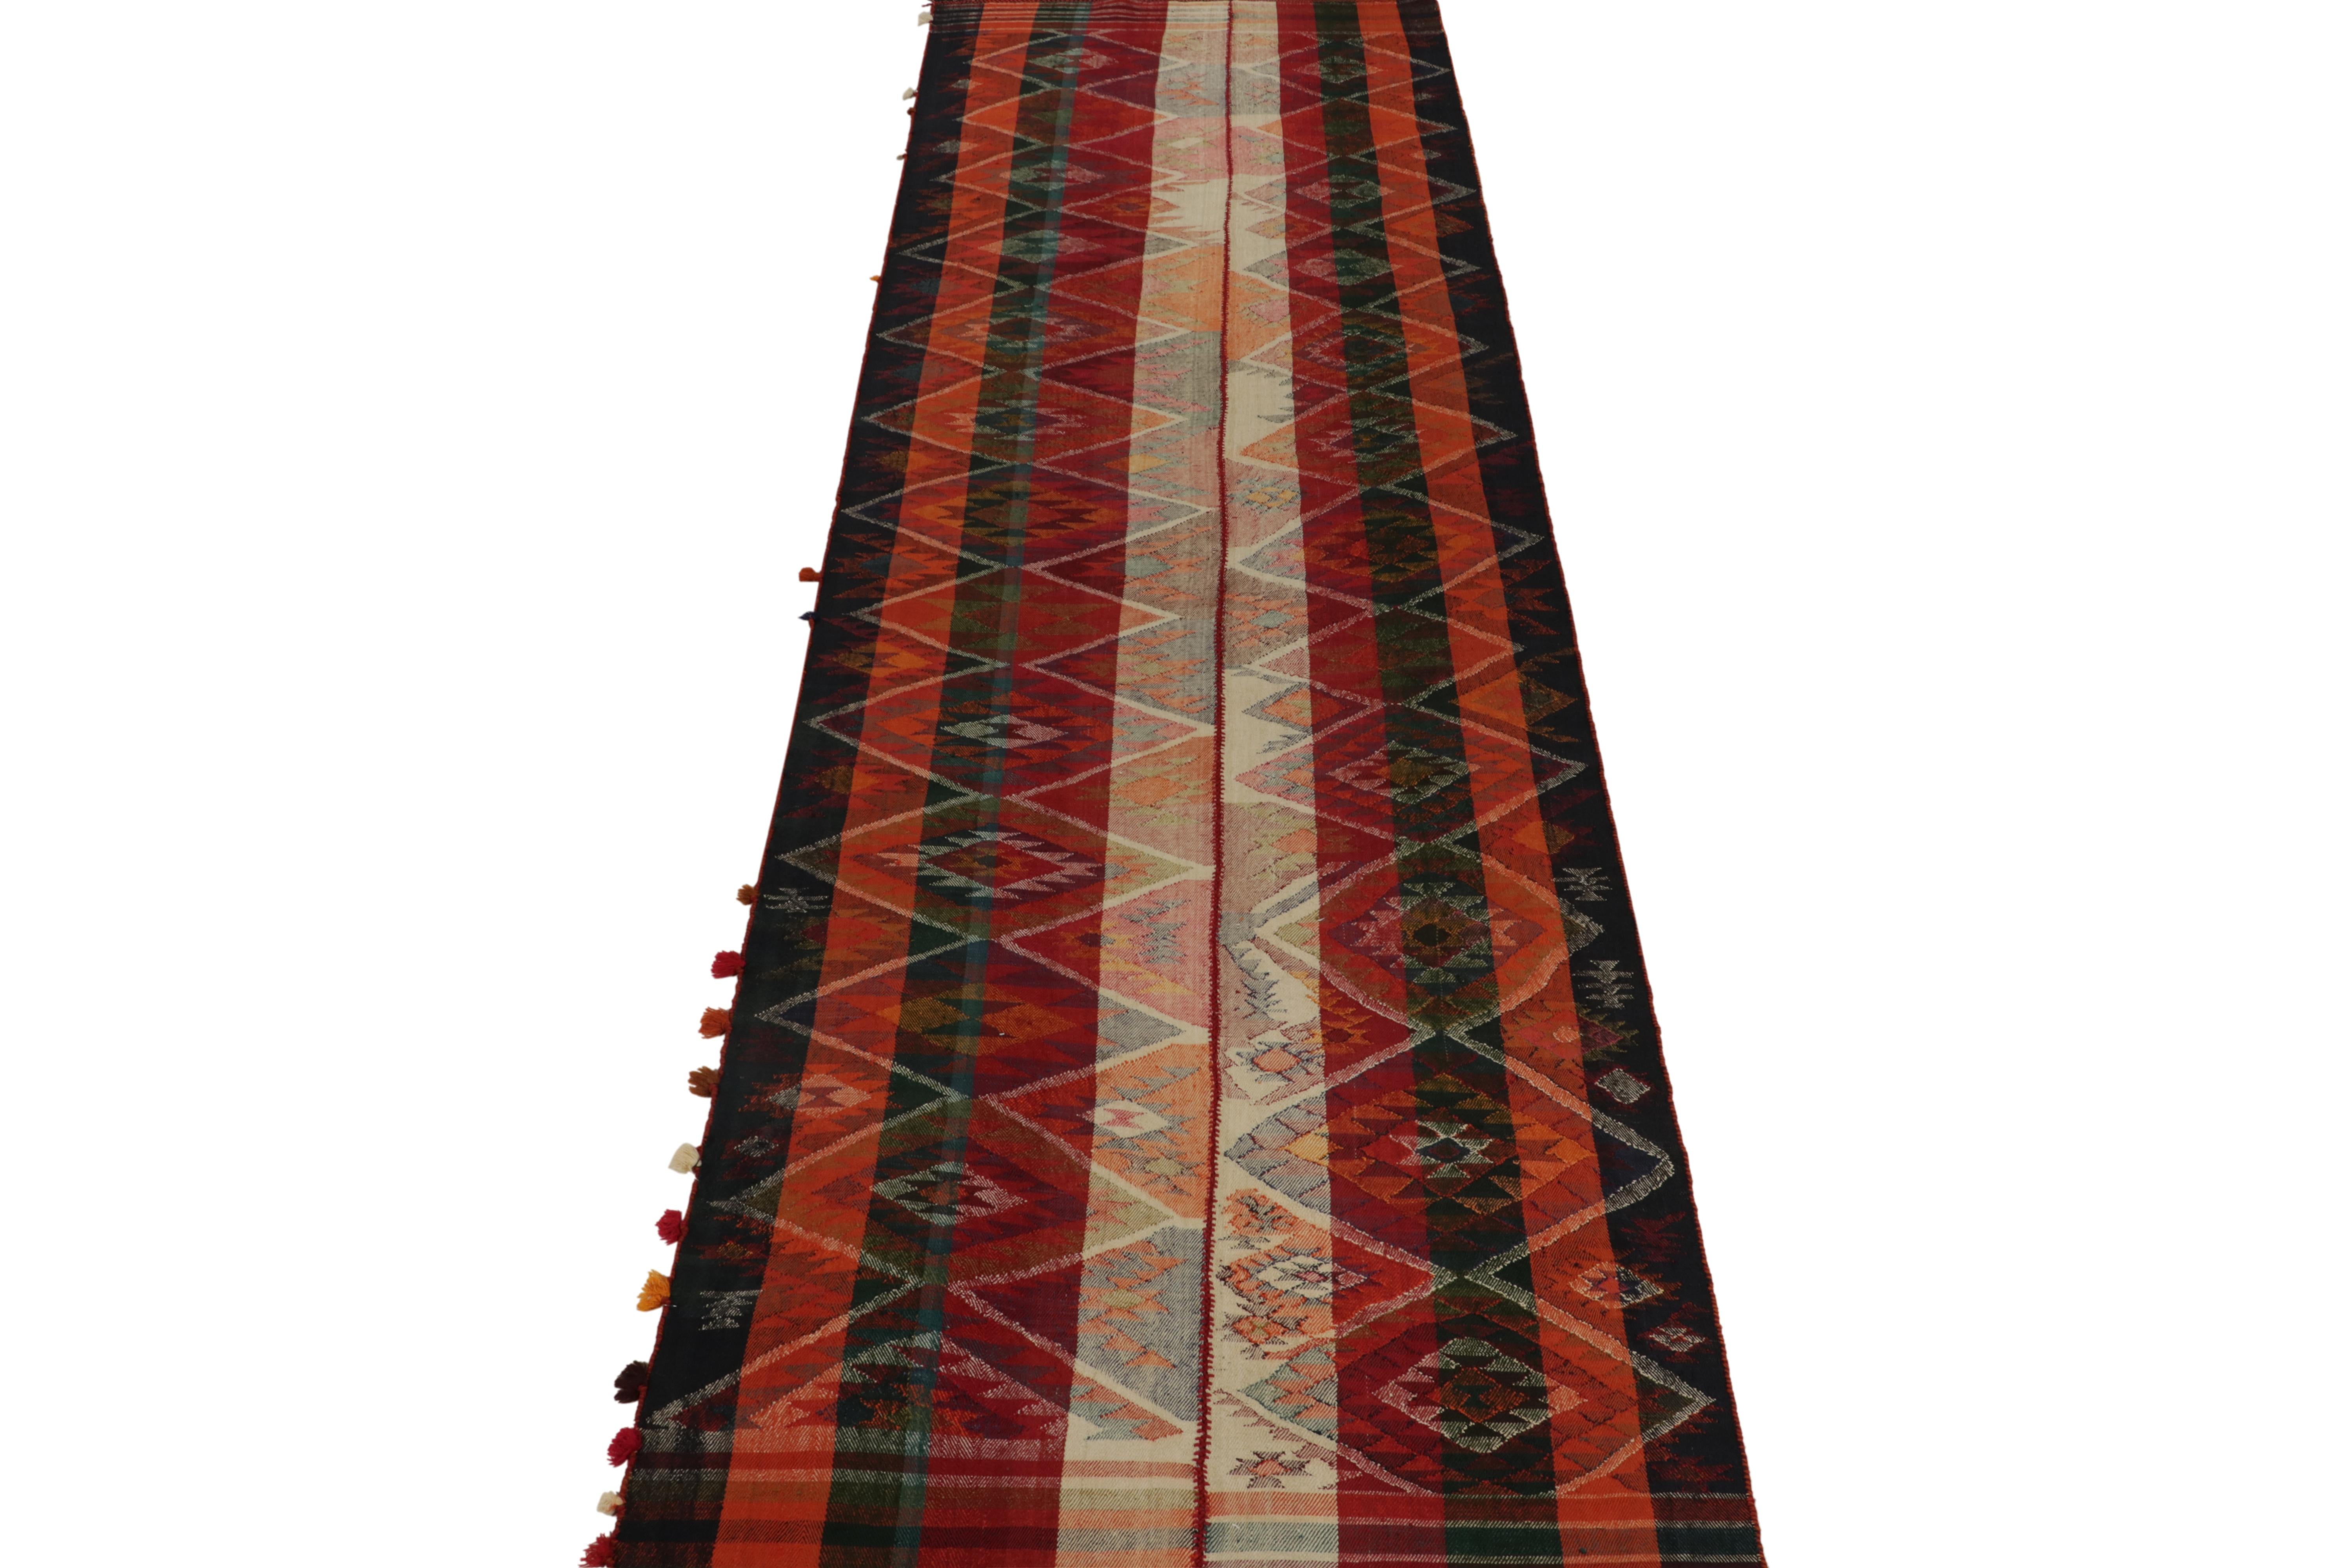 This vintage 4x15 Persian Shiraz kilim is a rare extra-long tribal gallery rug—handwoven in wool circa 1950-1960.

Further on the Design:

This flat weave is made in the panel-weaving technique, which combines two pieces like these into one large